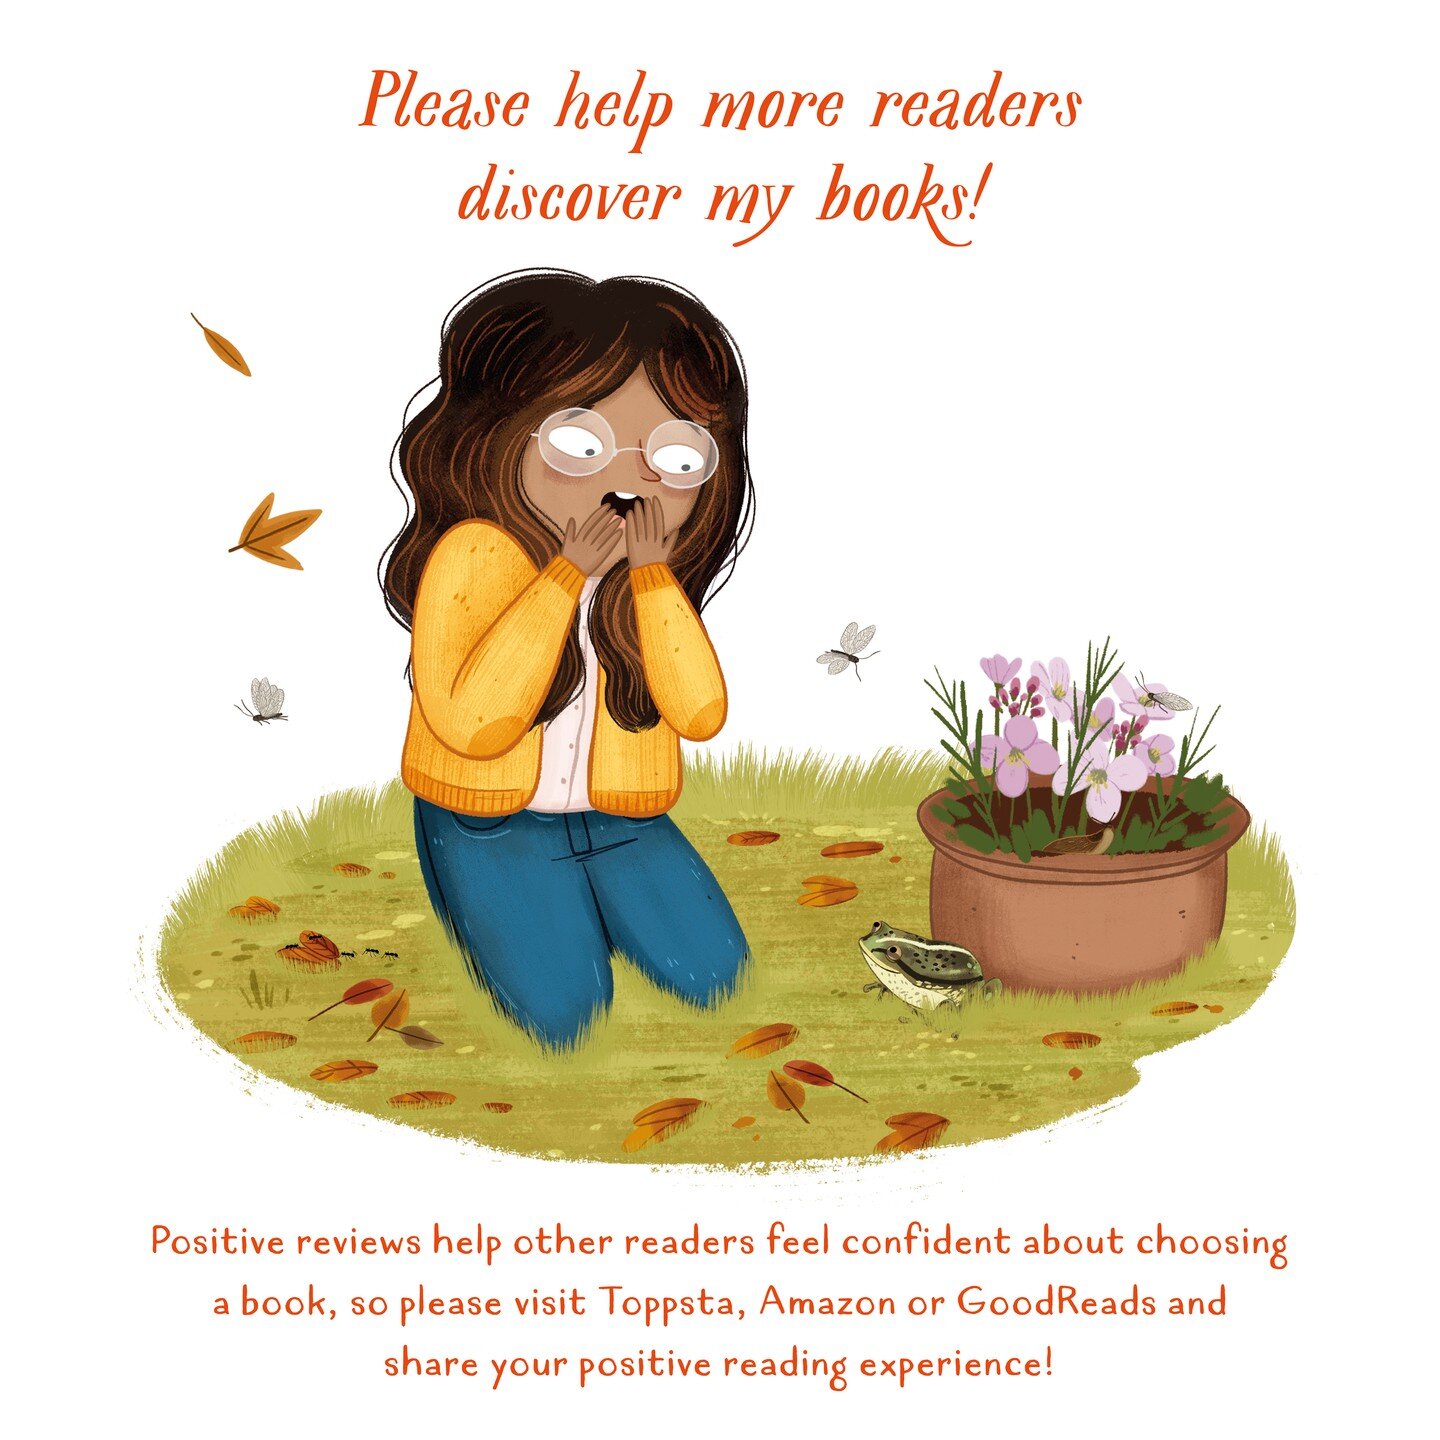 🐸 Please help more readers discover my books! 🌼

Positive reviews help other readers feel confident about choosing a book, so please visit @toppsta Amazon or GoodReads and share your positive book review!

#booksforkids #picturebook #children #rais